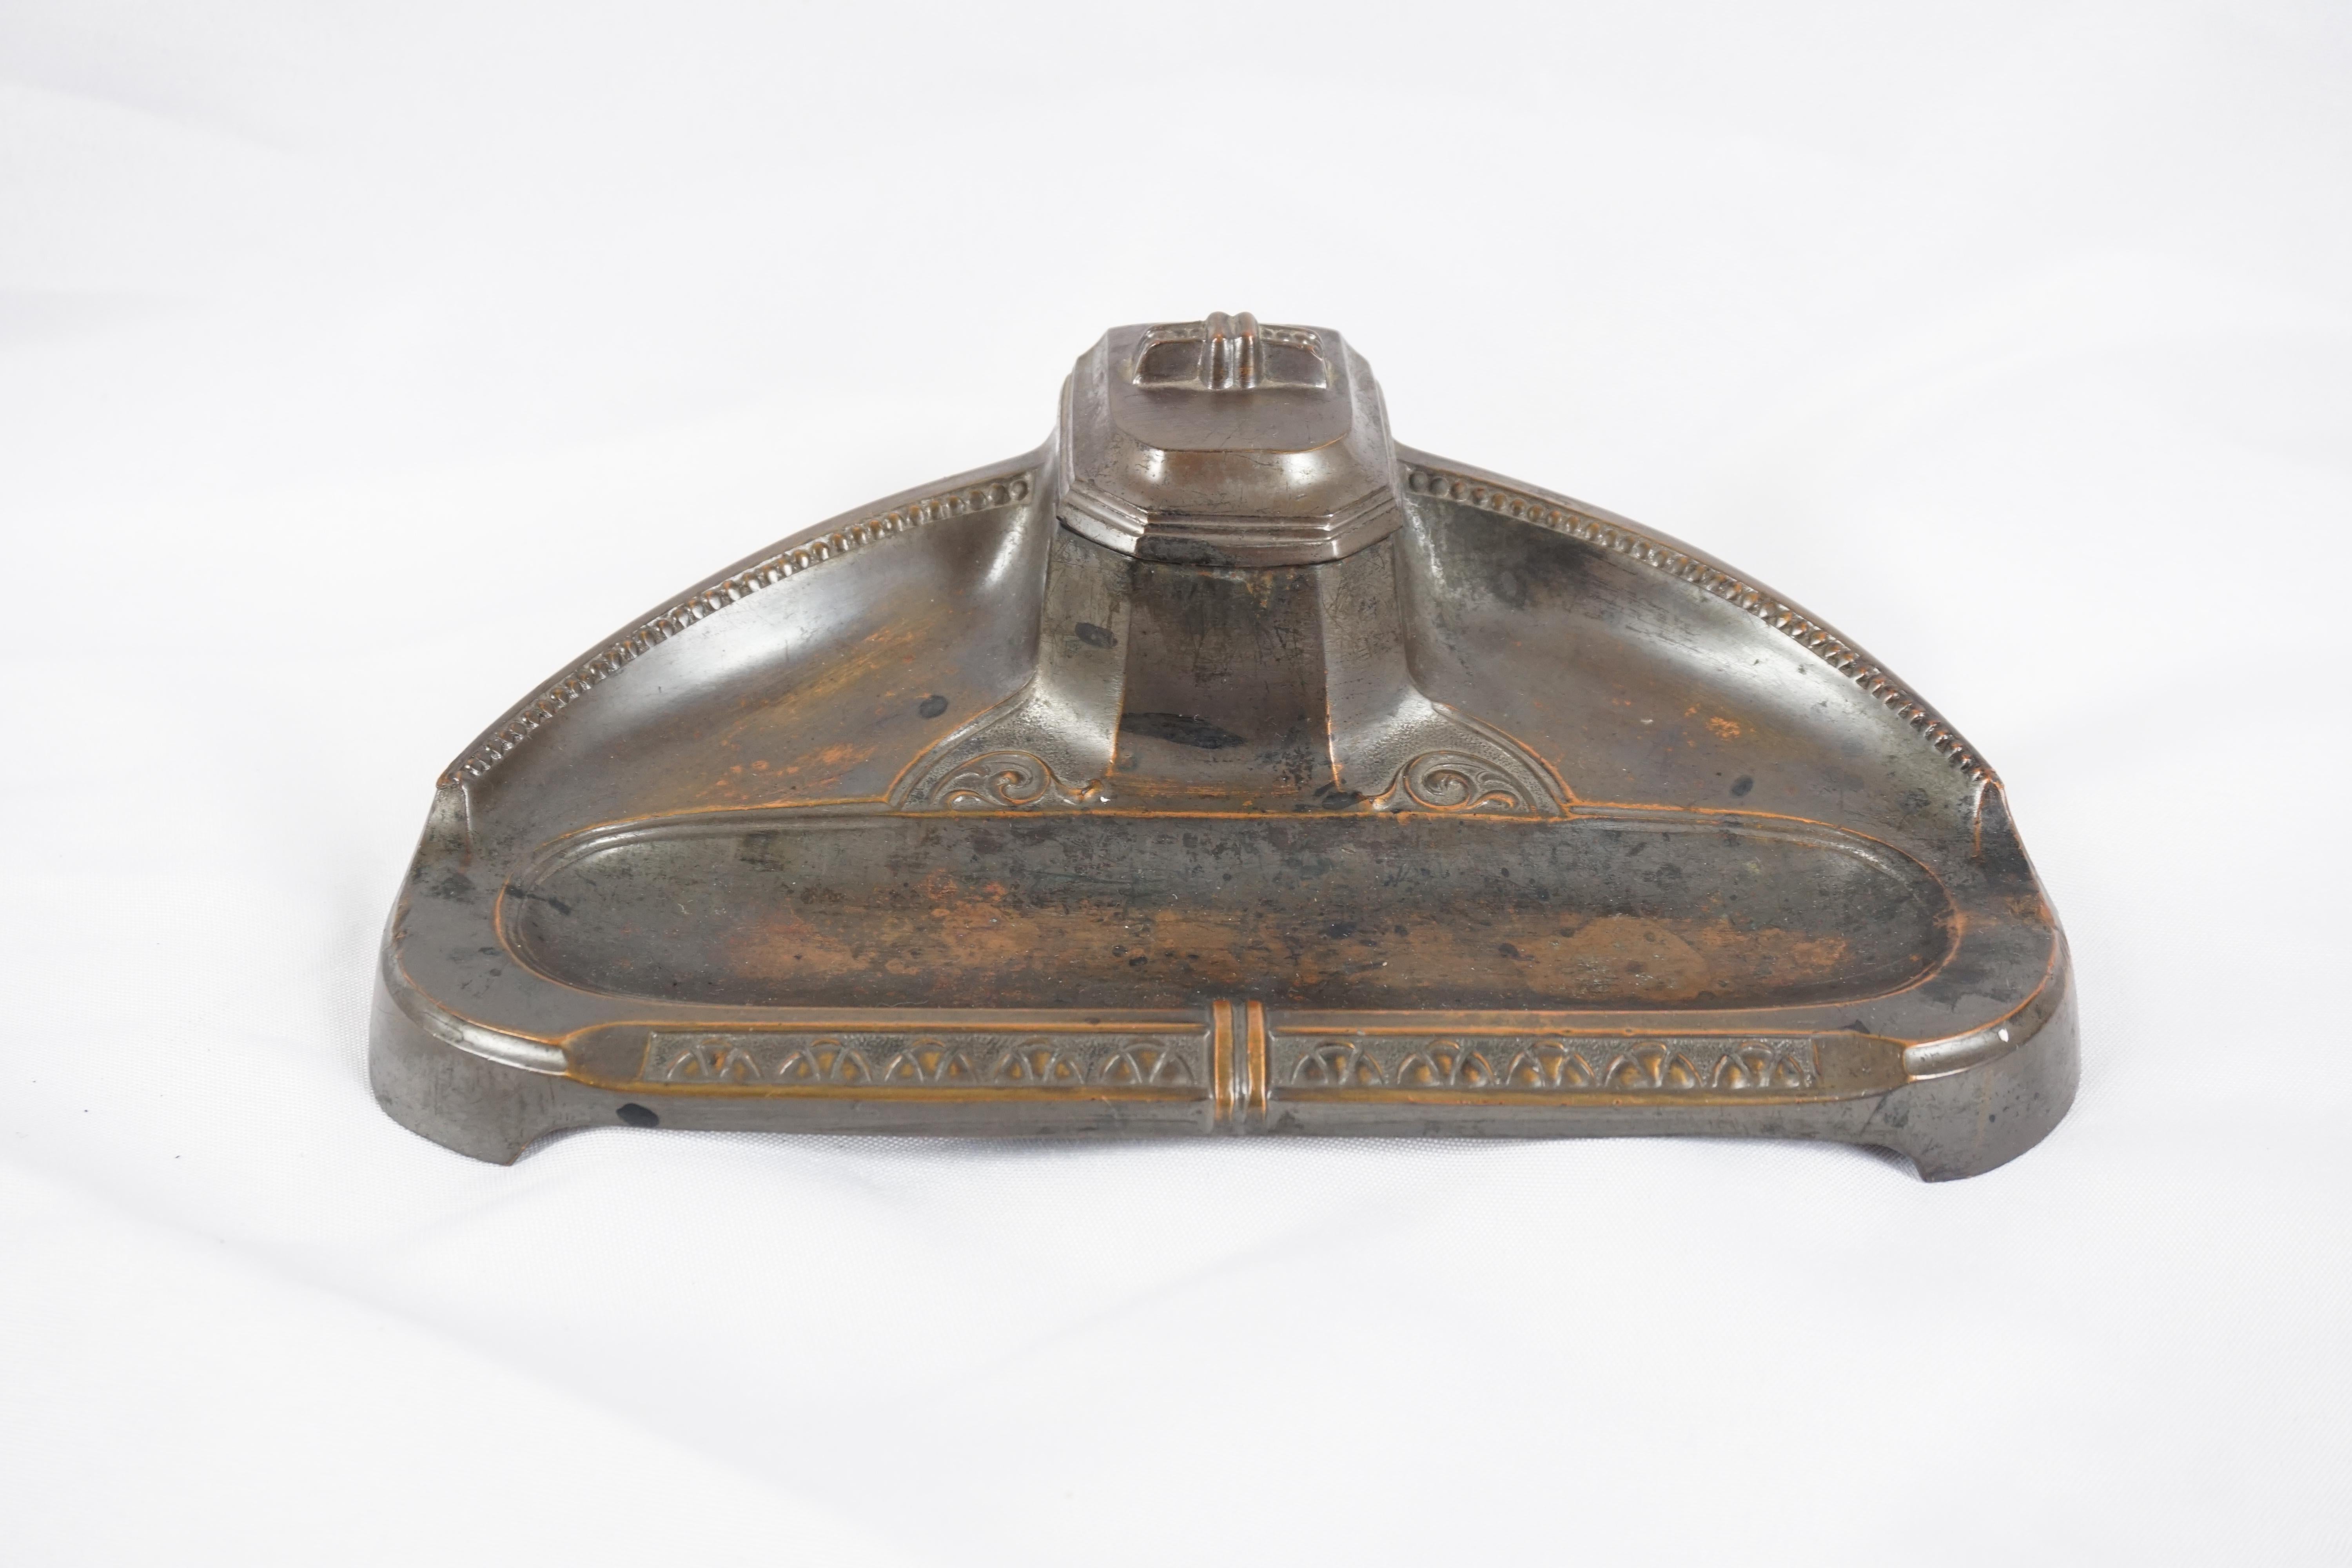 Antique Metal Inkwell, Painted Inkstand, Germany 1930, H301

Germany 1930
Metal 
German Inkwell Stand With Carving To The Front 
Lift Up Lid With Chipped Glass Insert 
Pen Rest To The Front 
Nice Colour 

H301

Measures: 8.5